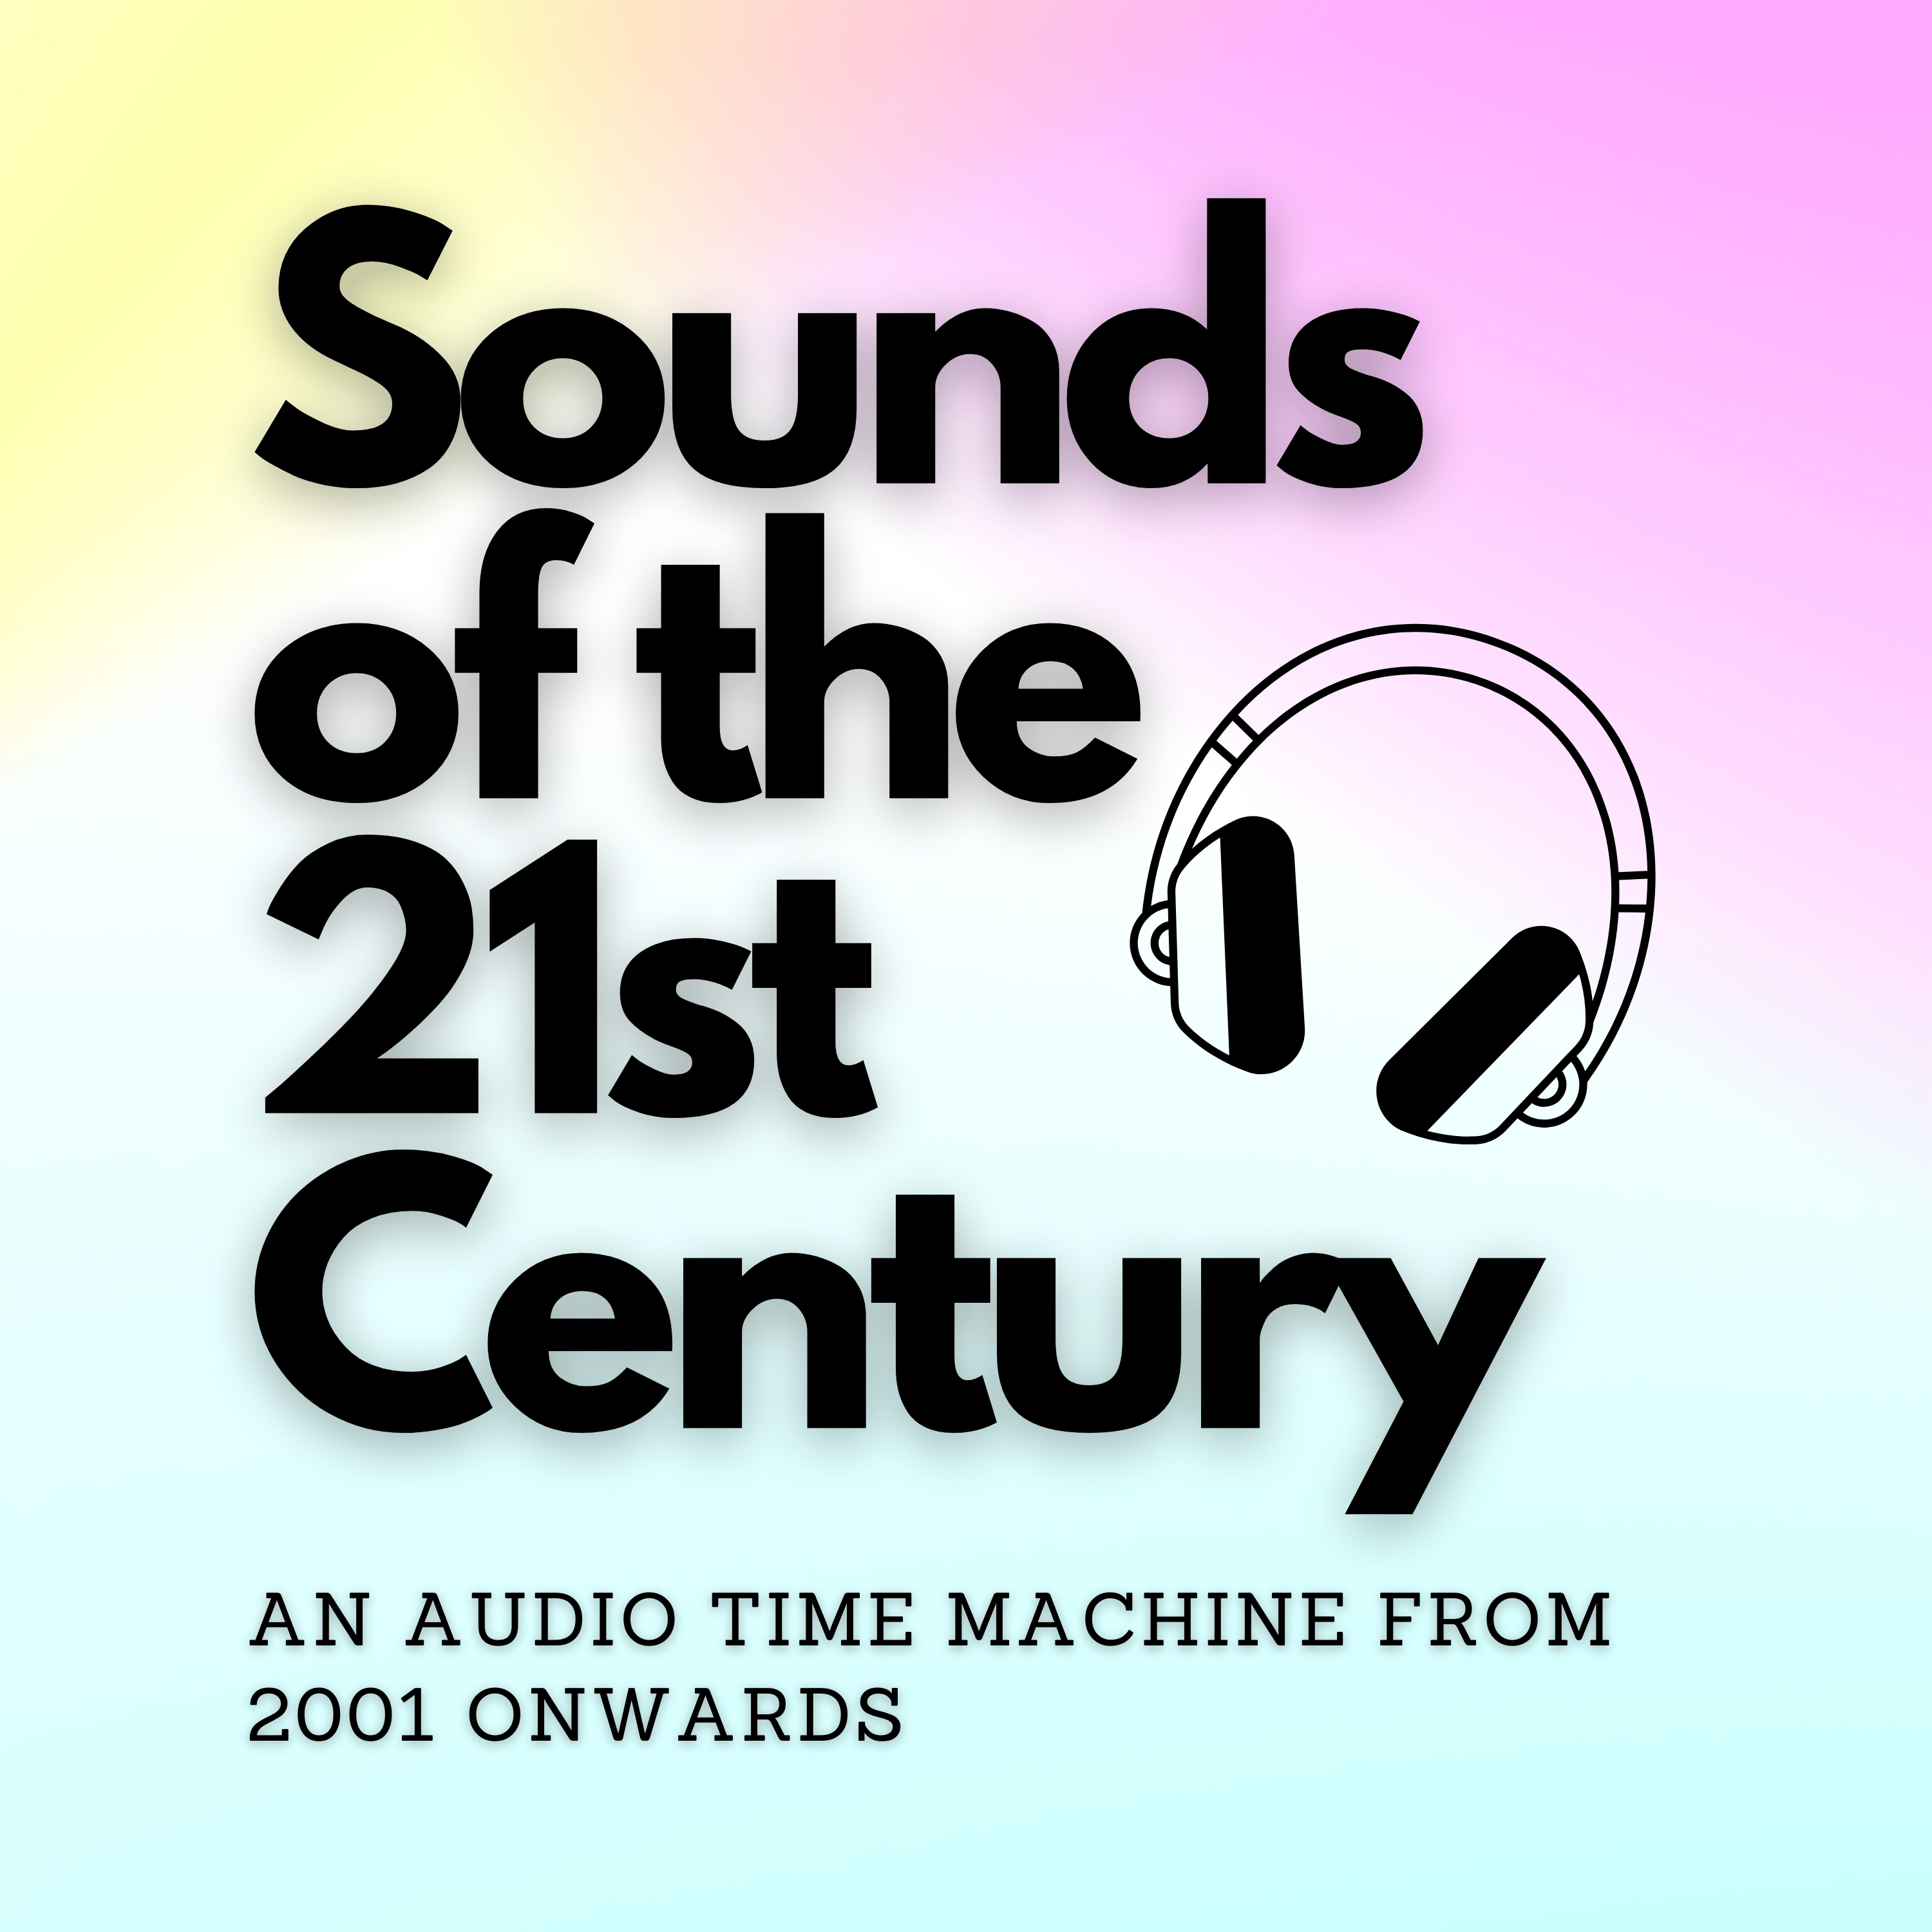 The Sounds of the 21st Century